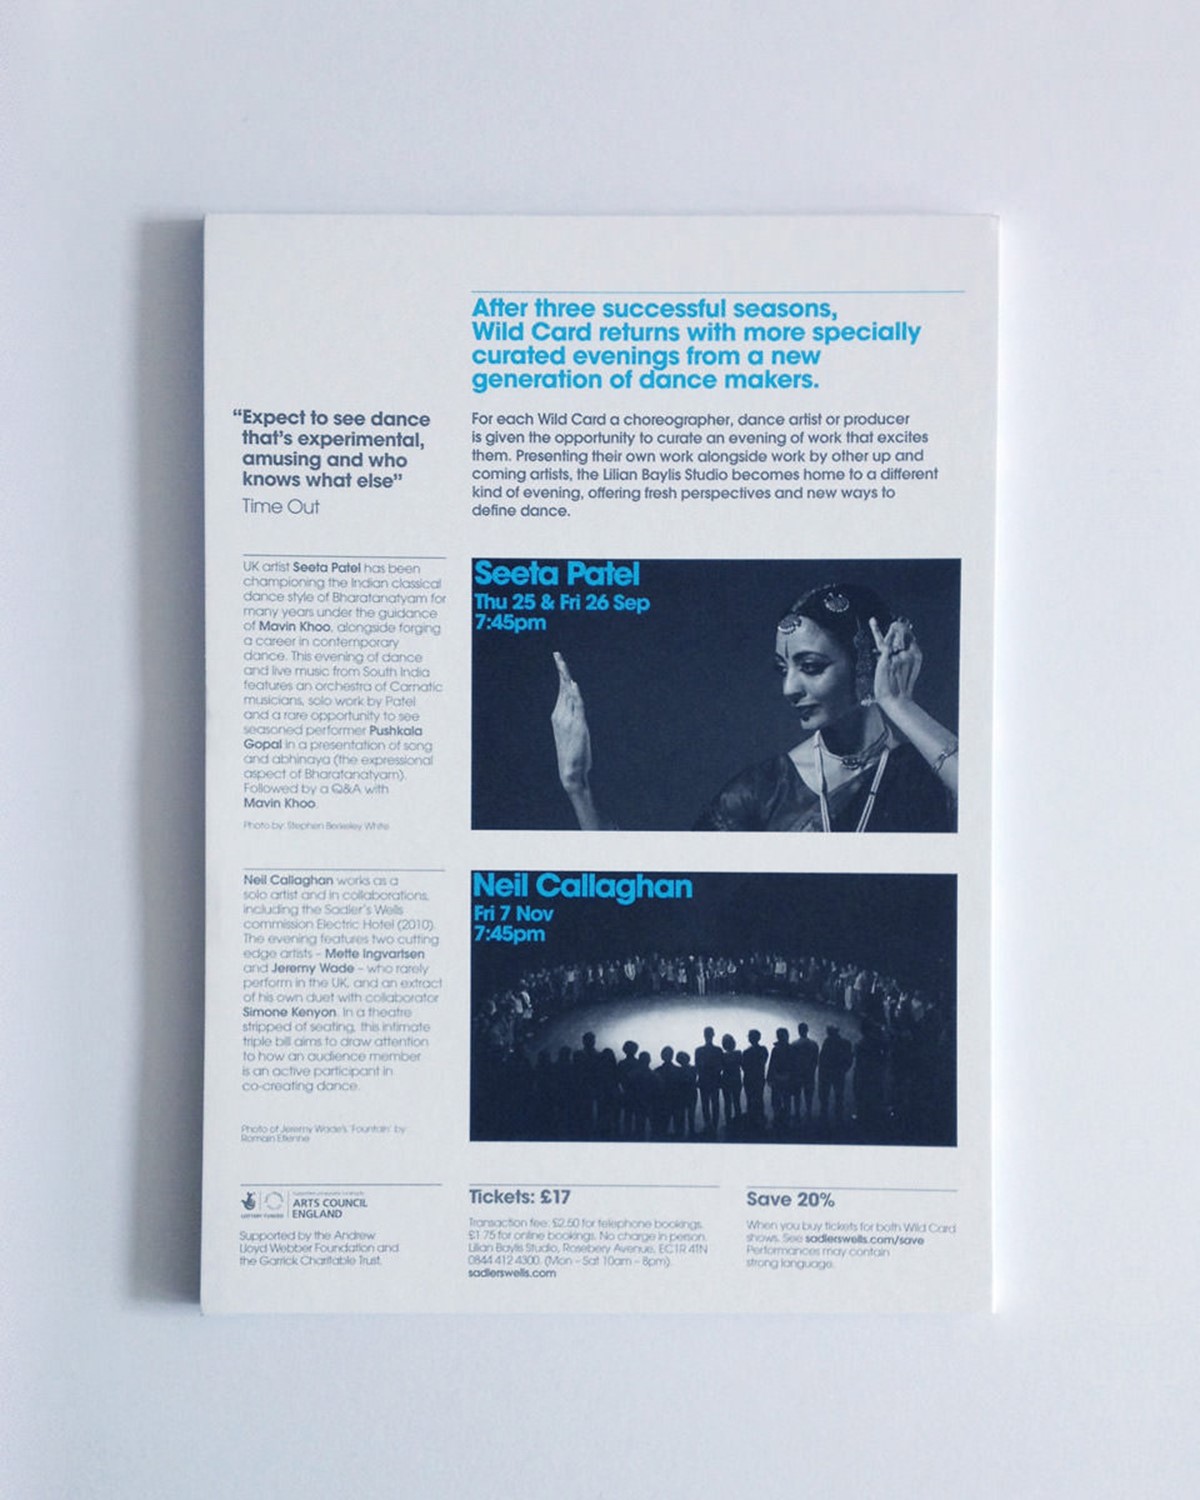 Sadler's Wells. Wildcard season 3. Flyer back. Identity and design by Superfried. Manchester.